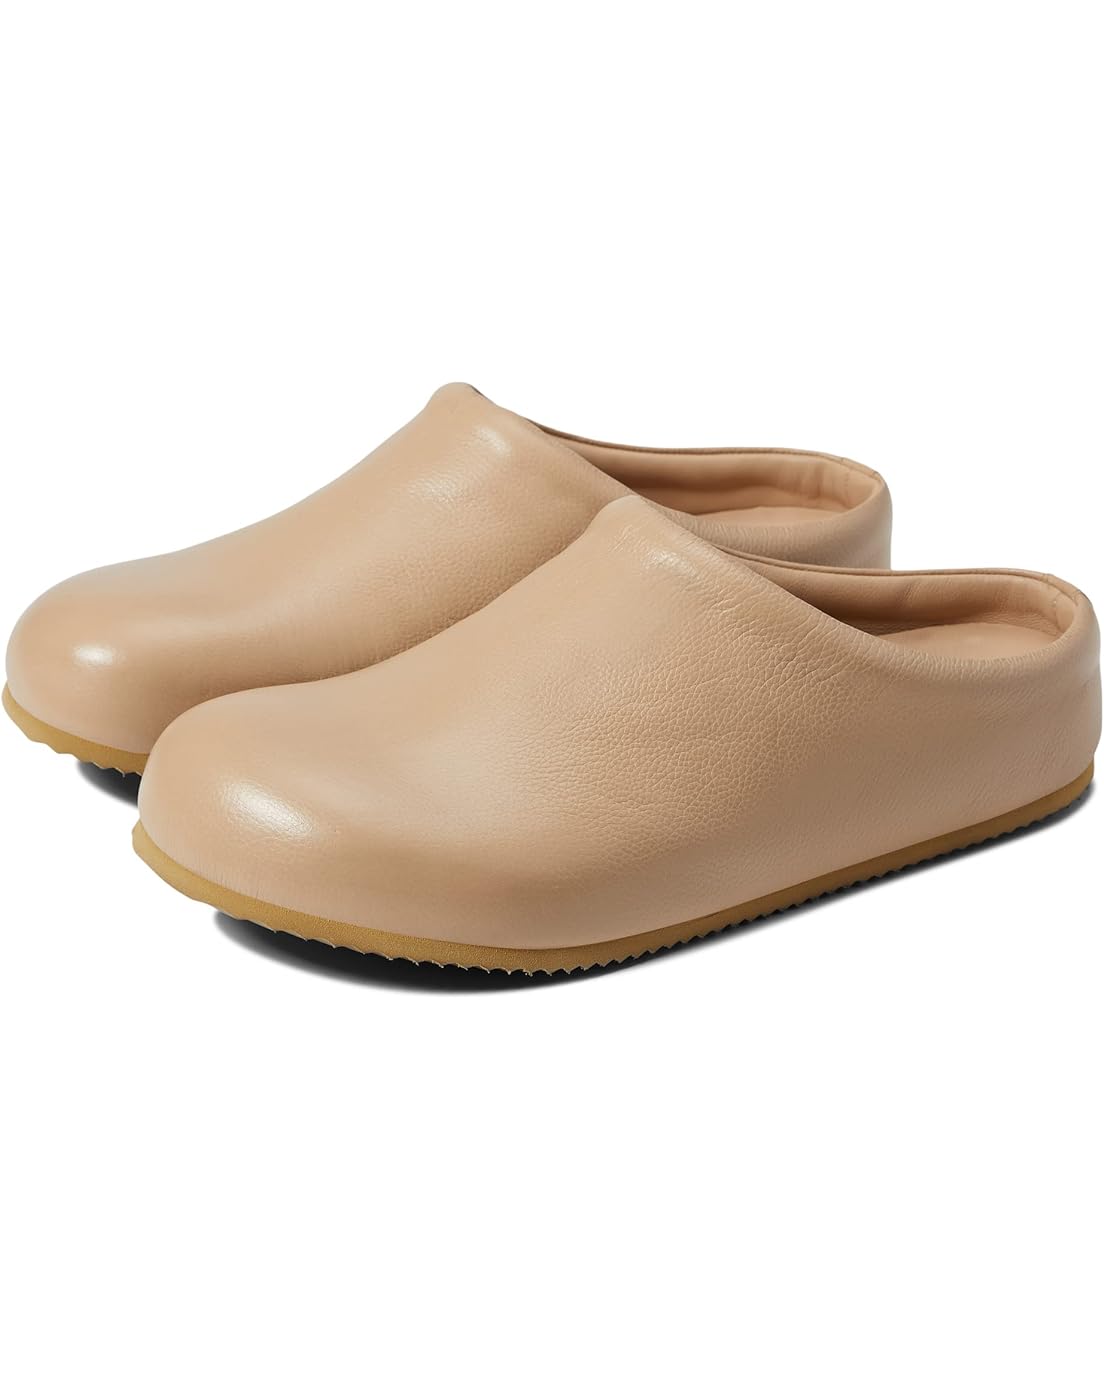 Free People Cambria Clog Foobed